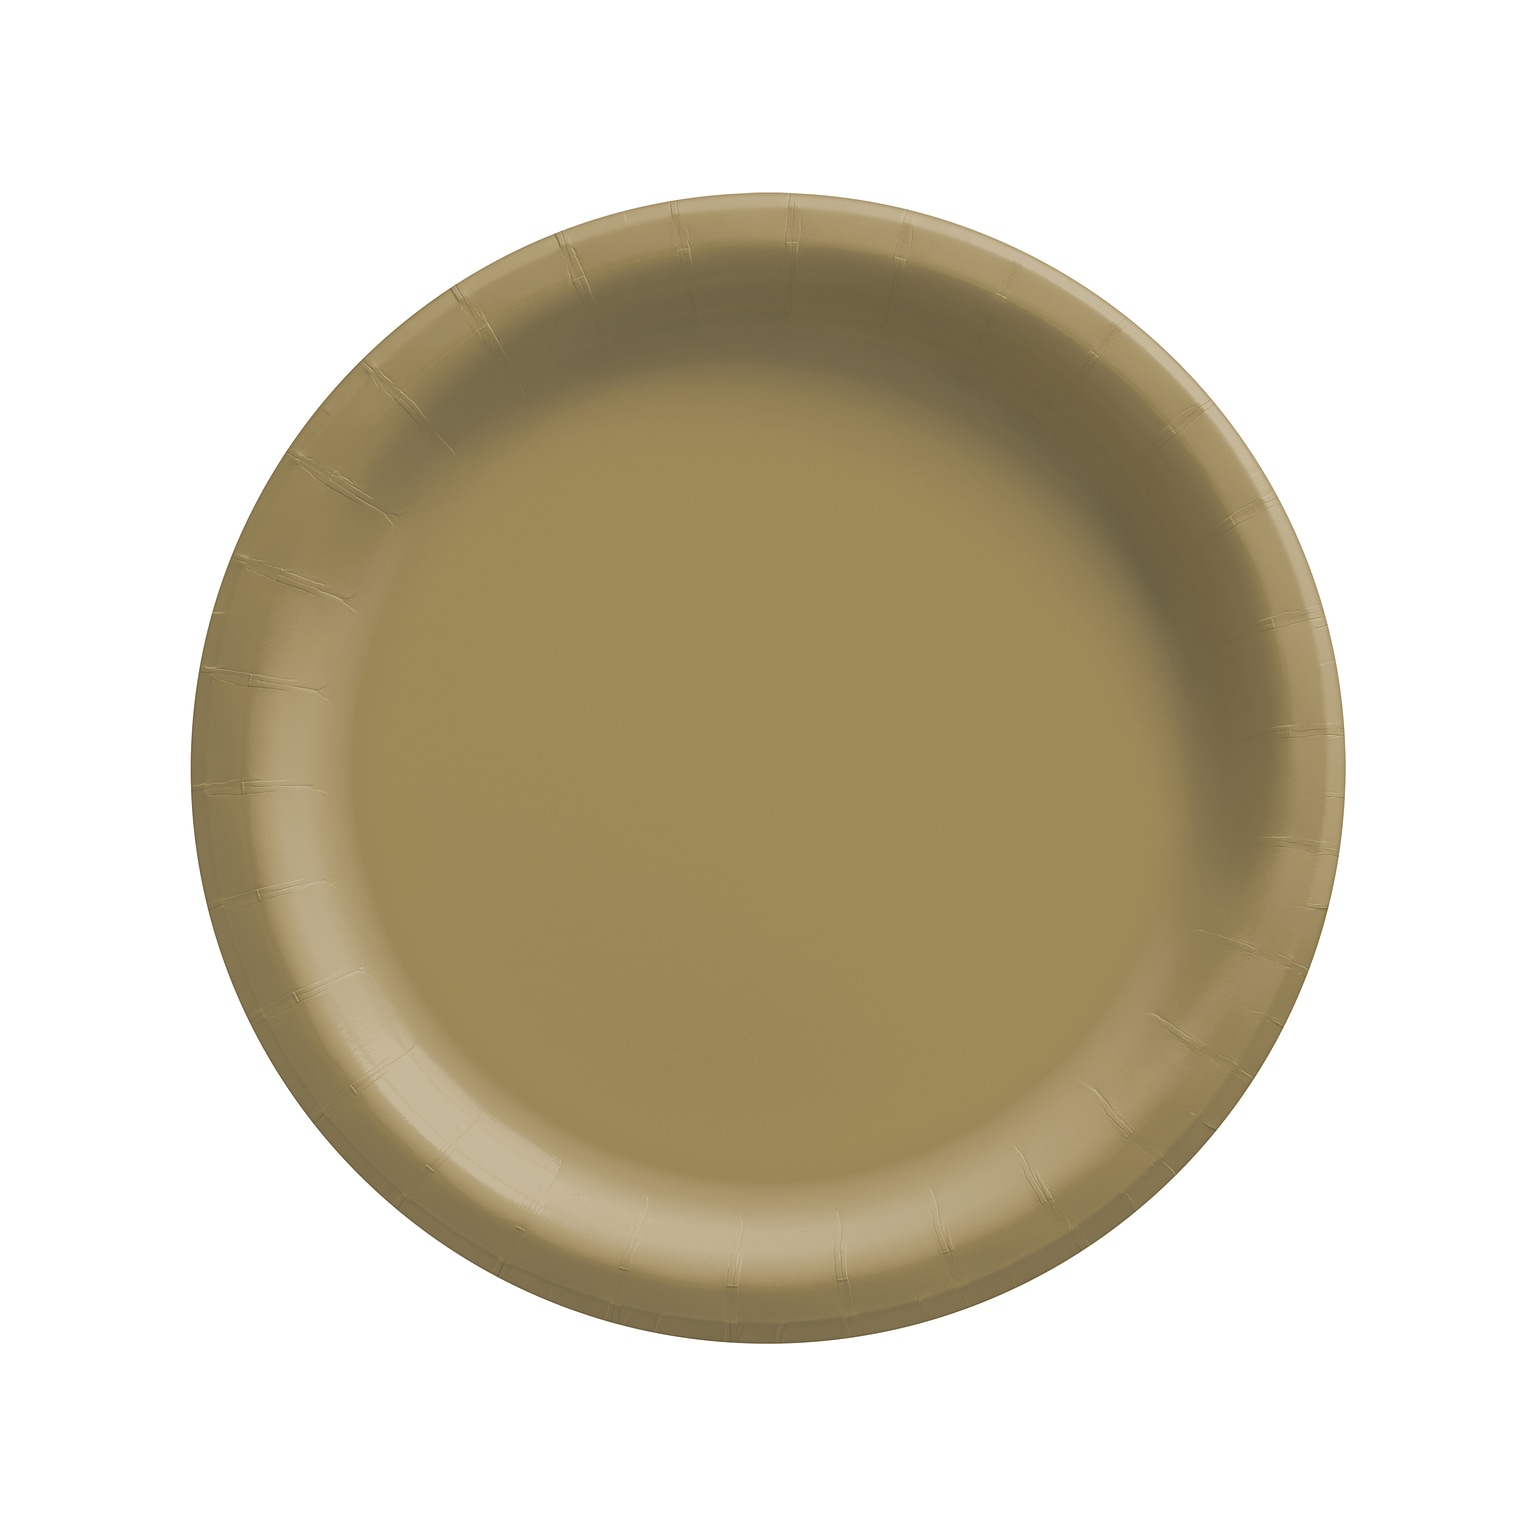 Amscan 8.5 Paper Plate, Gold, 50 Plates/Pack, 3 Packs/Set (650011.19)